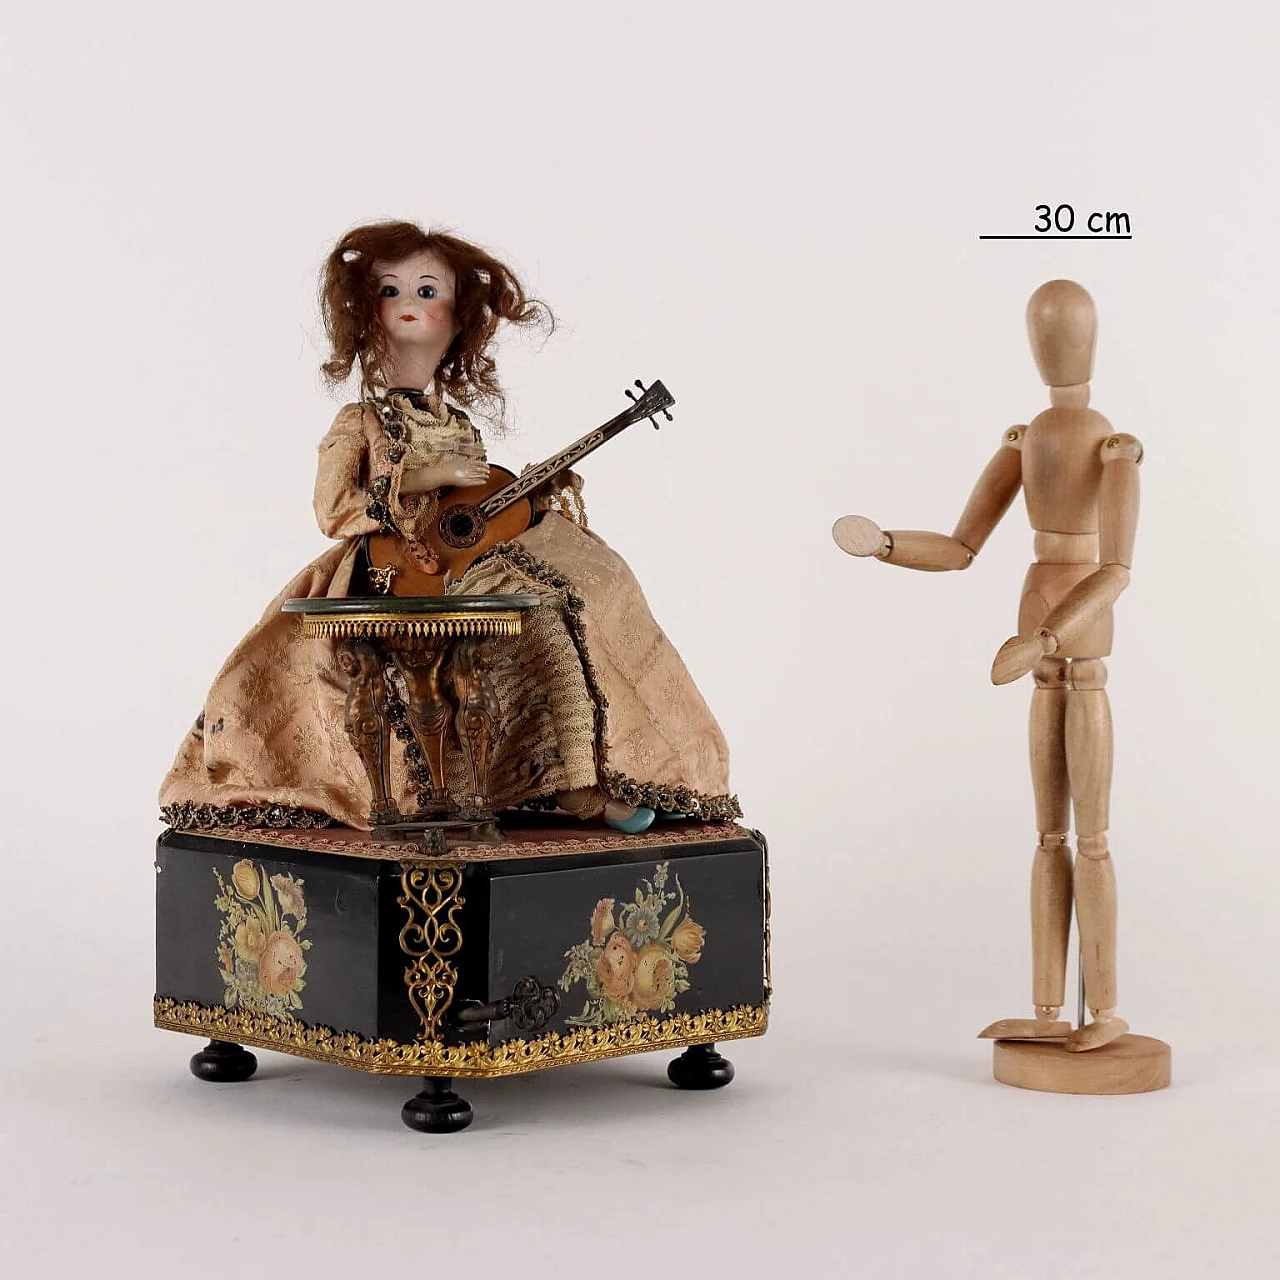 Wood, bronze, porcelain and fabric woman robot with guitar, 19th century 2